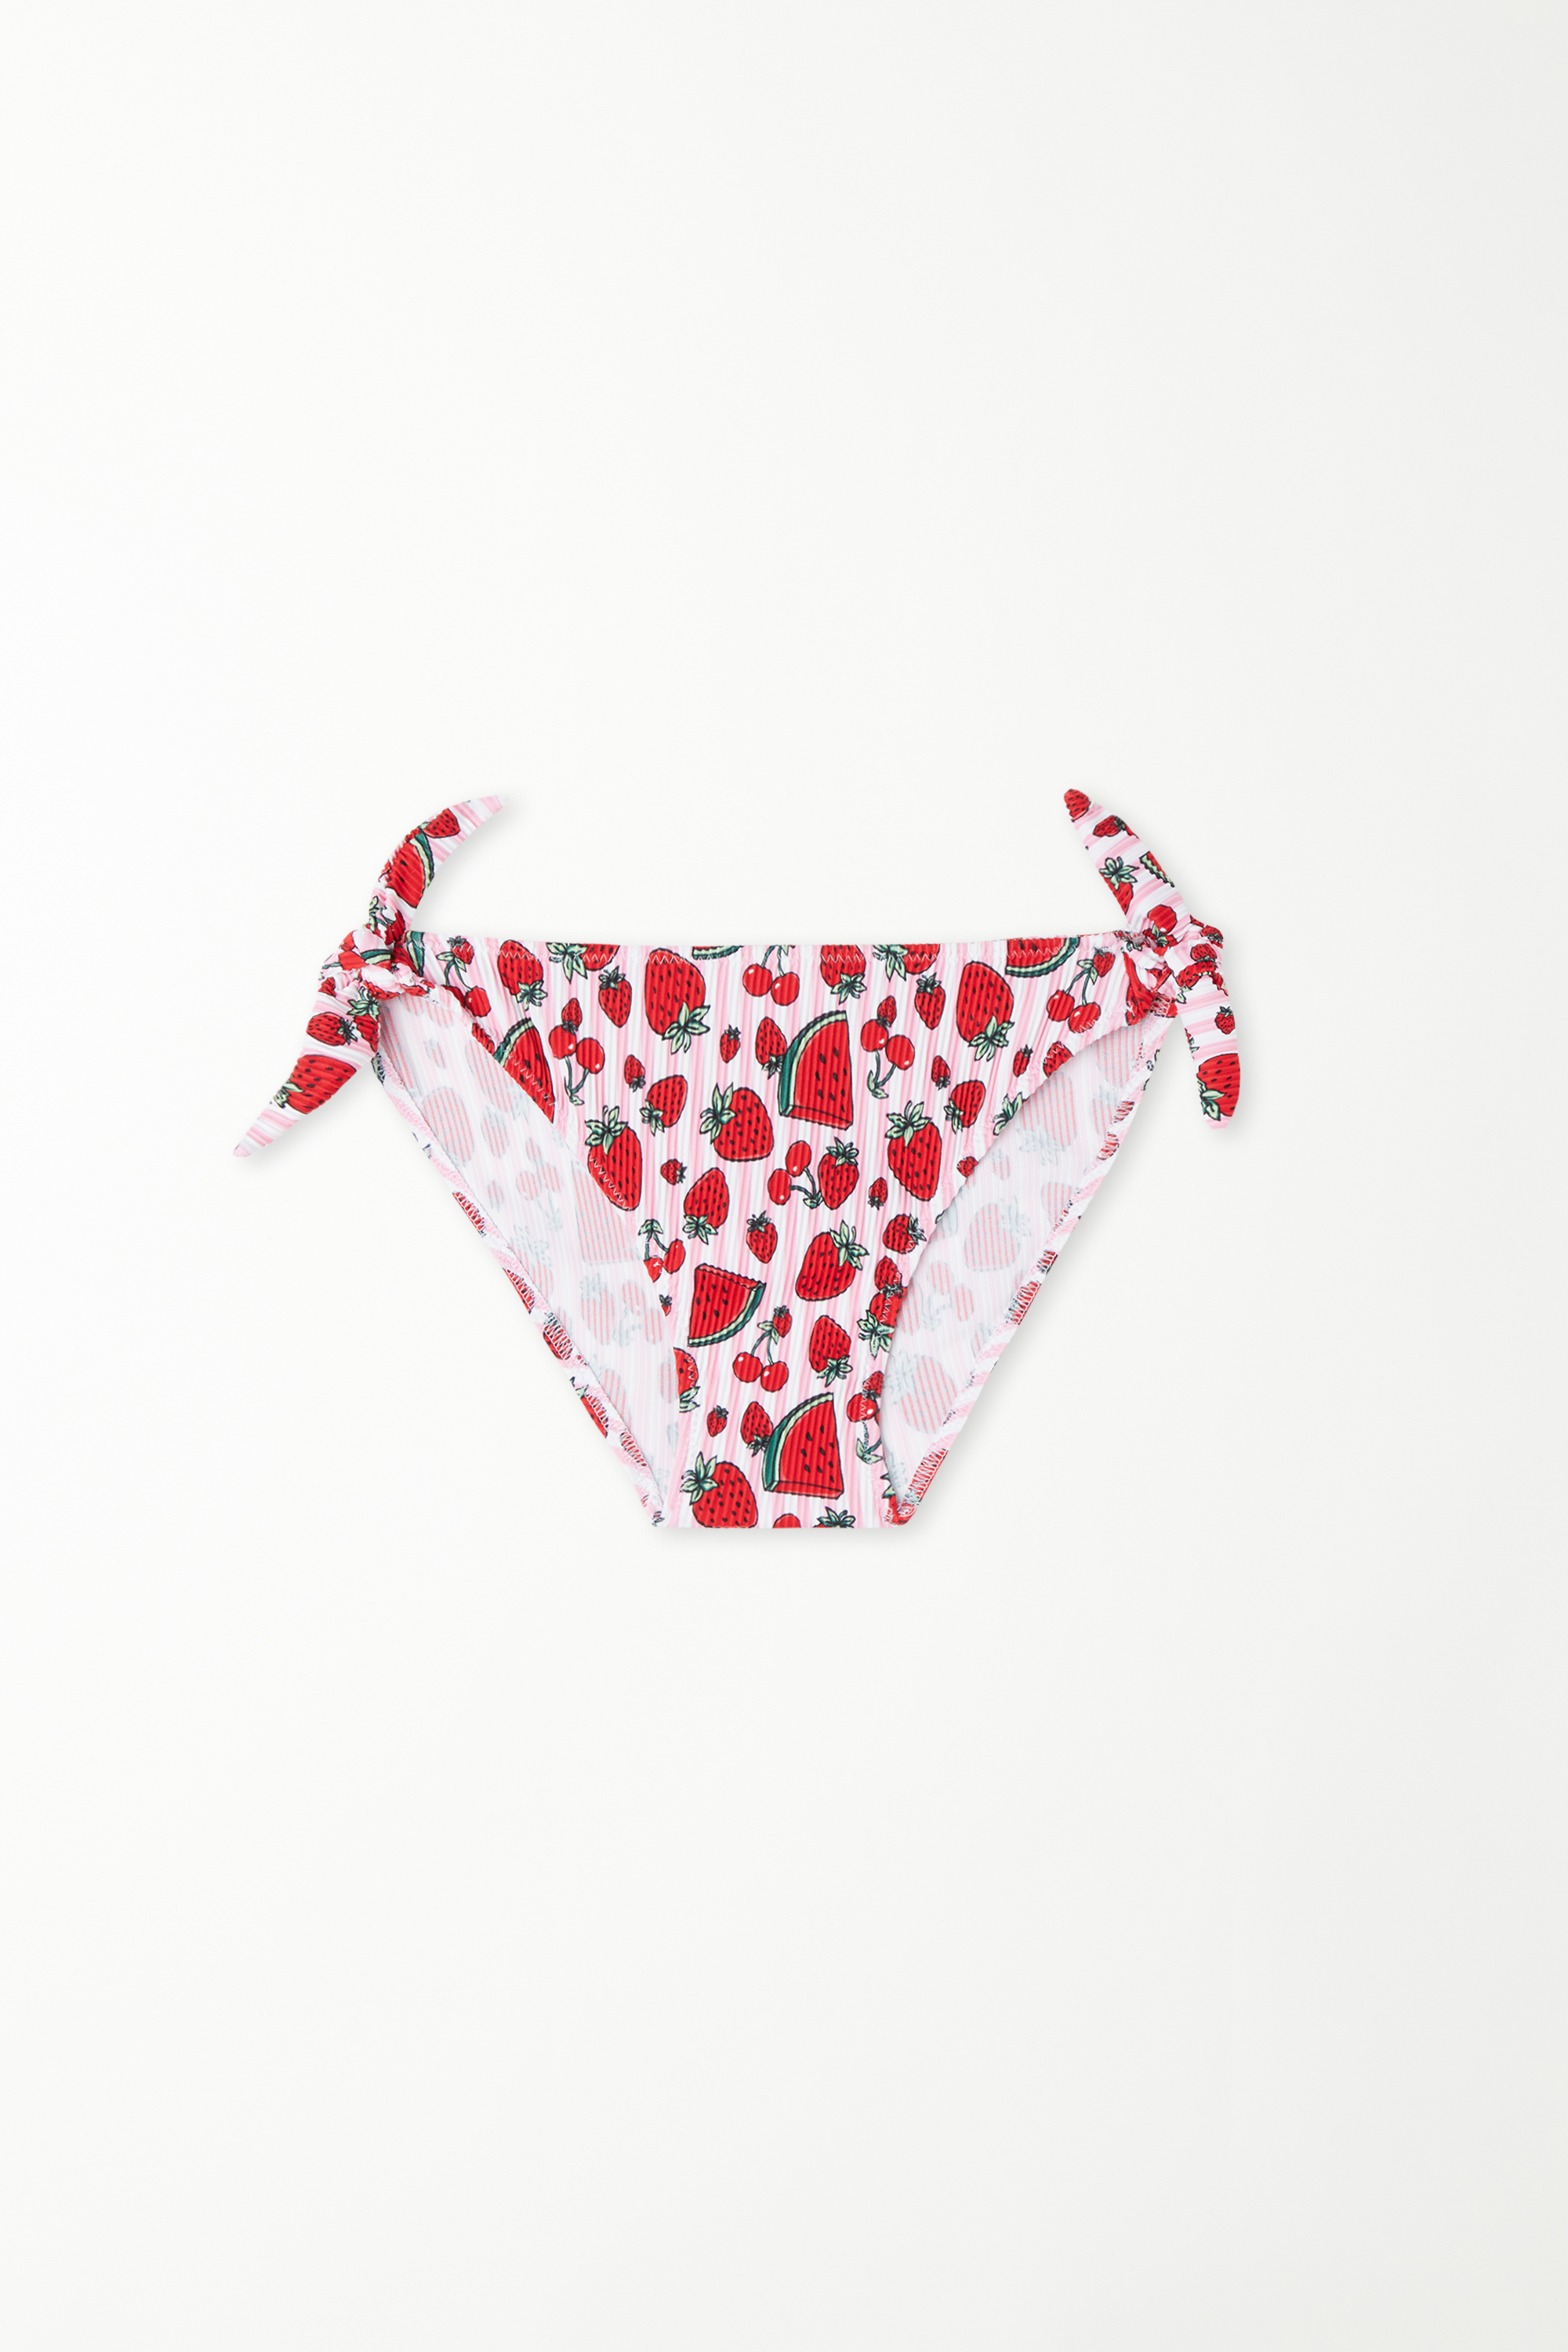 Girls’ Fruit and Striped Print Bralette Bikini Top and Bottoms with Ties